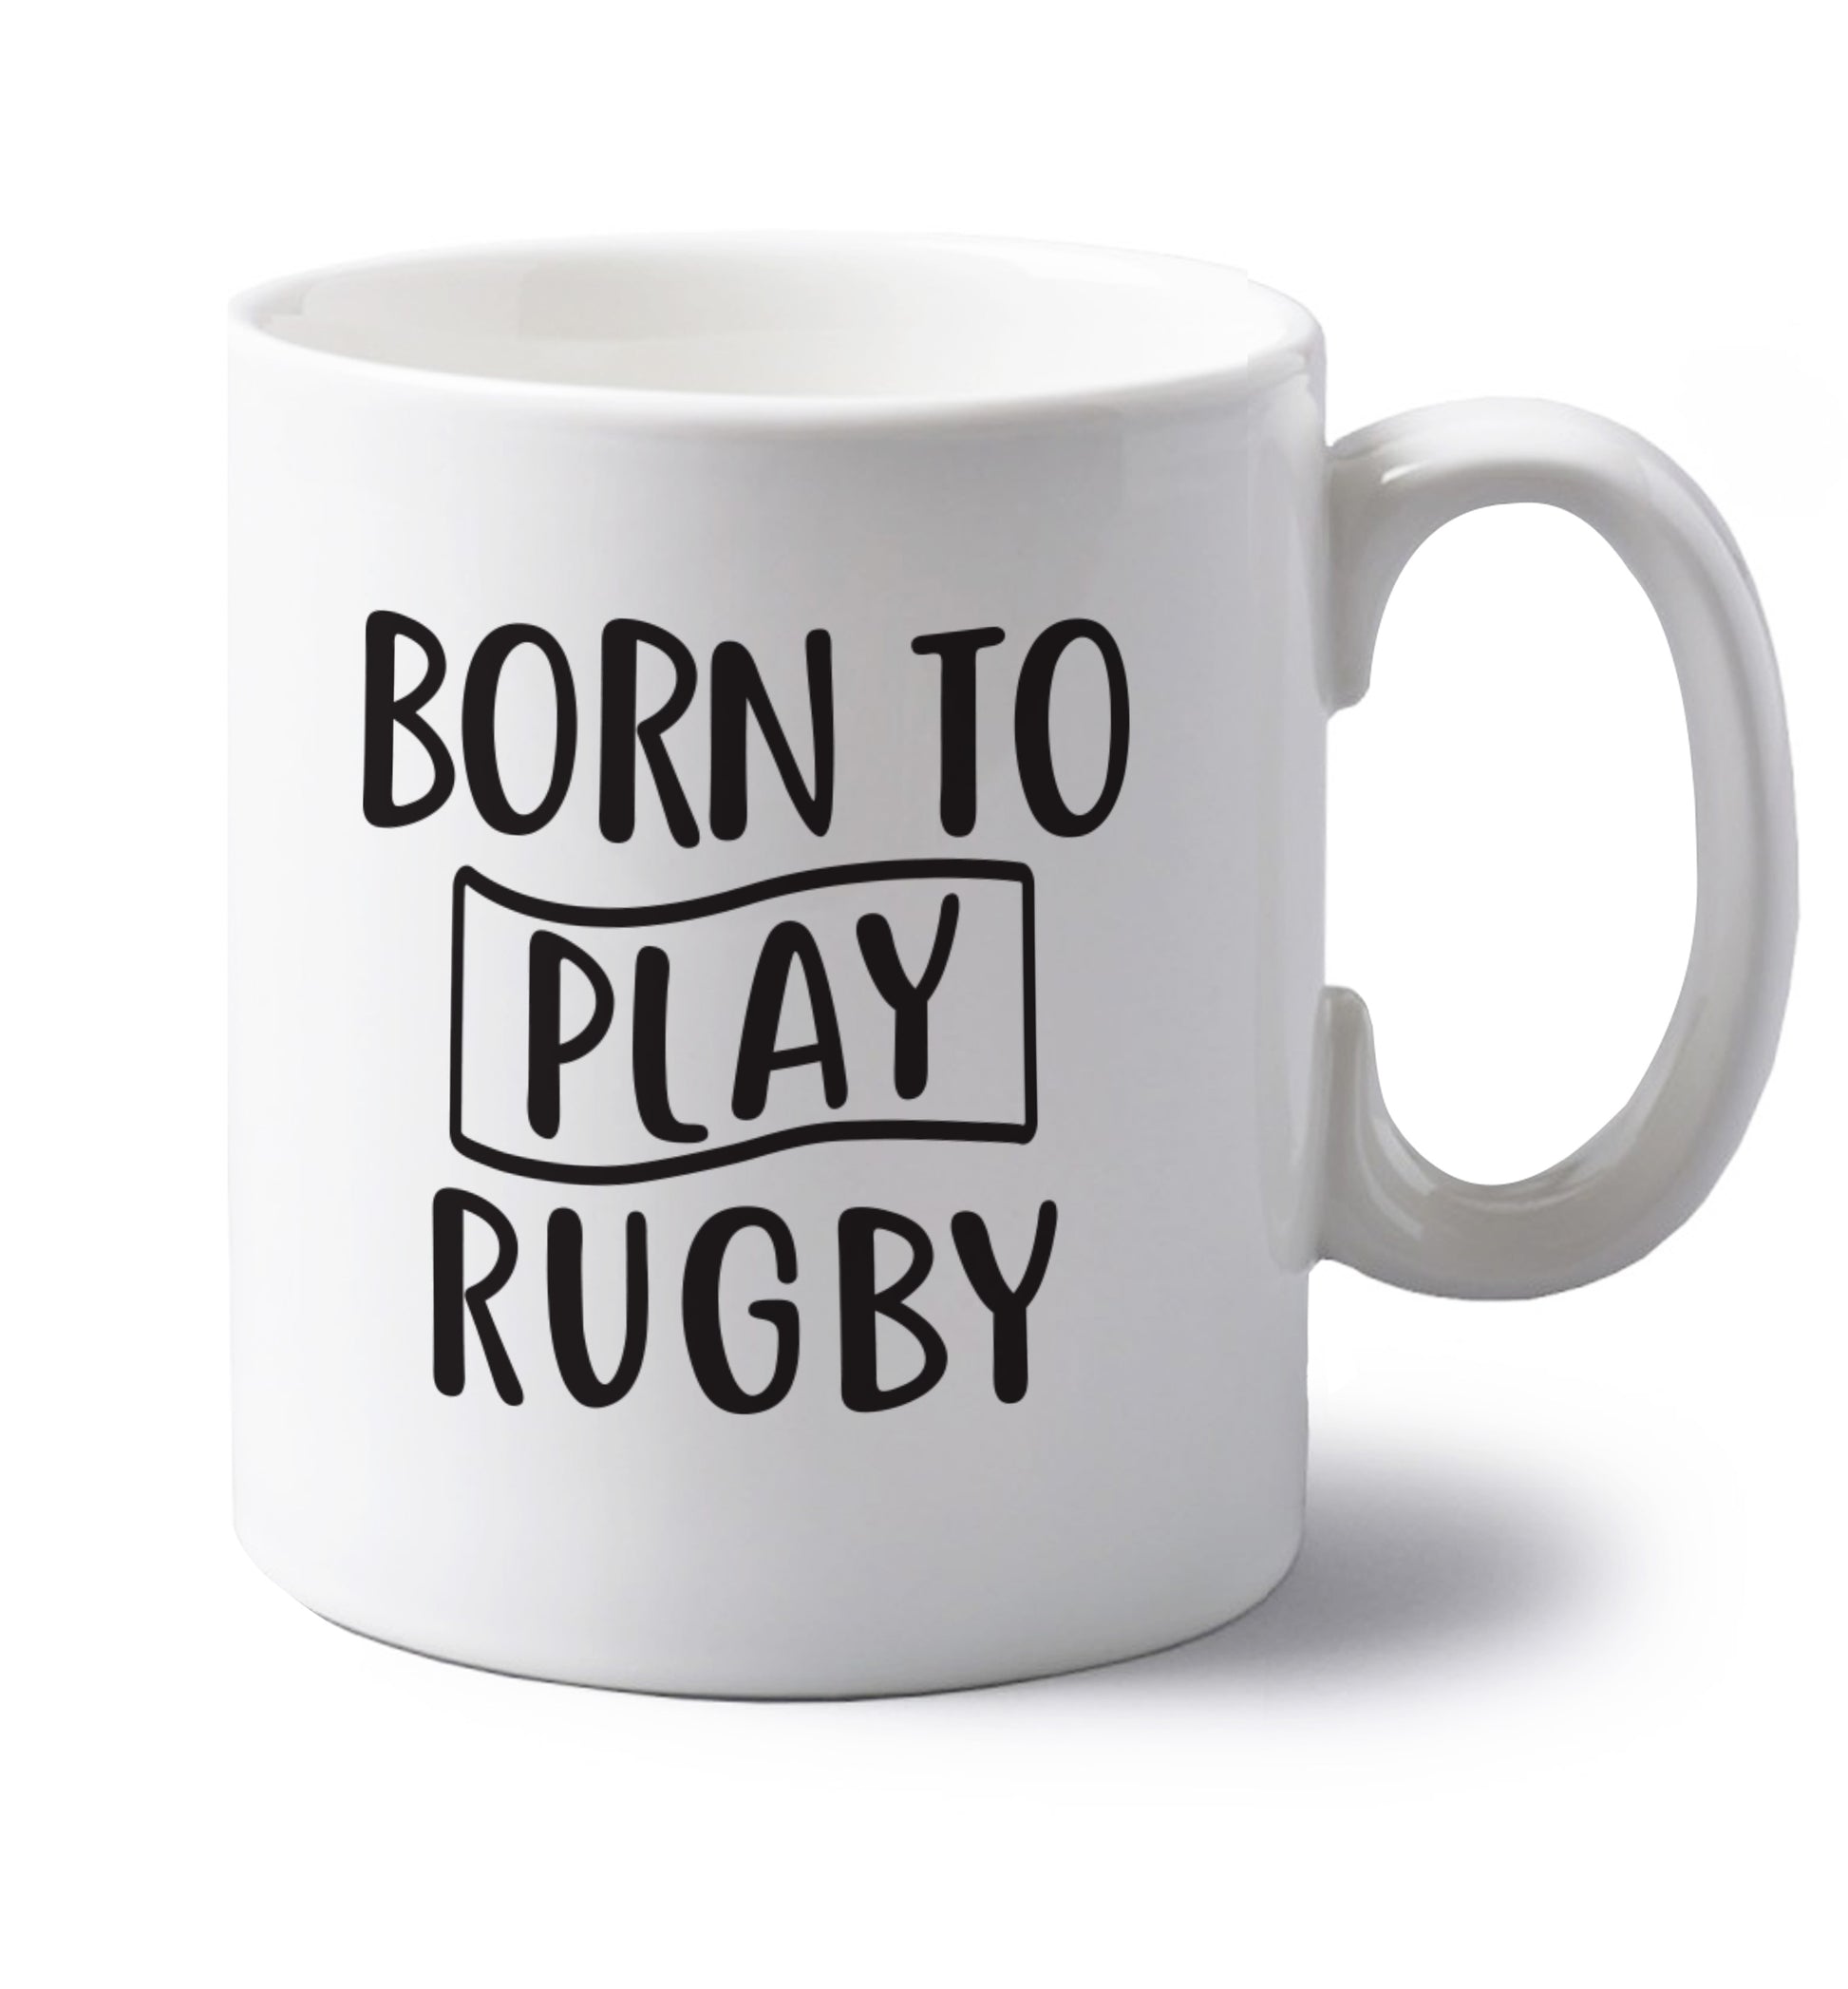 Born to play rugby left handed white ceramic mug 